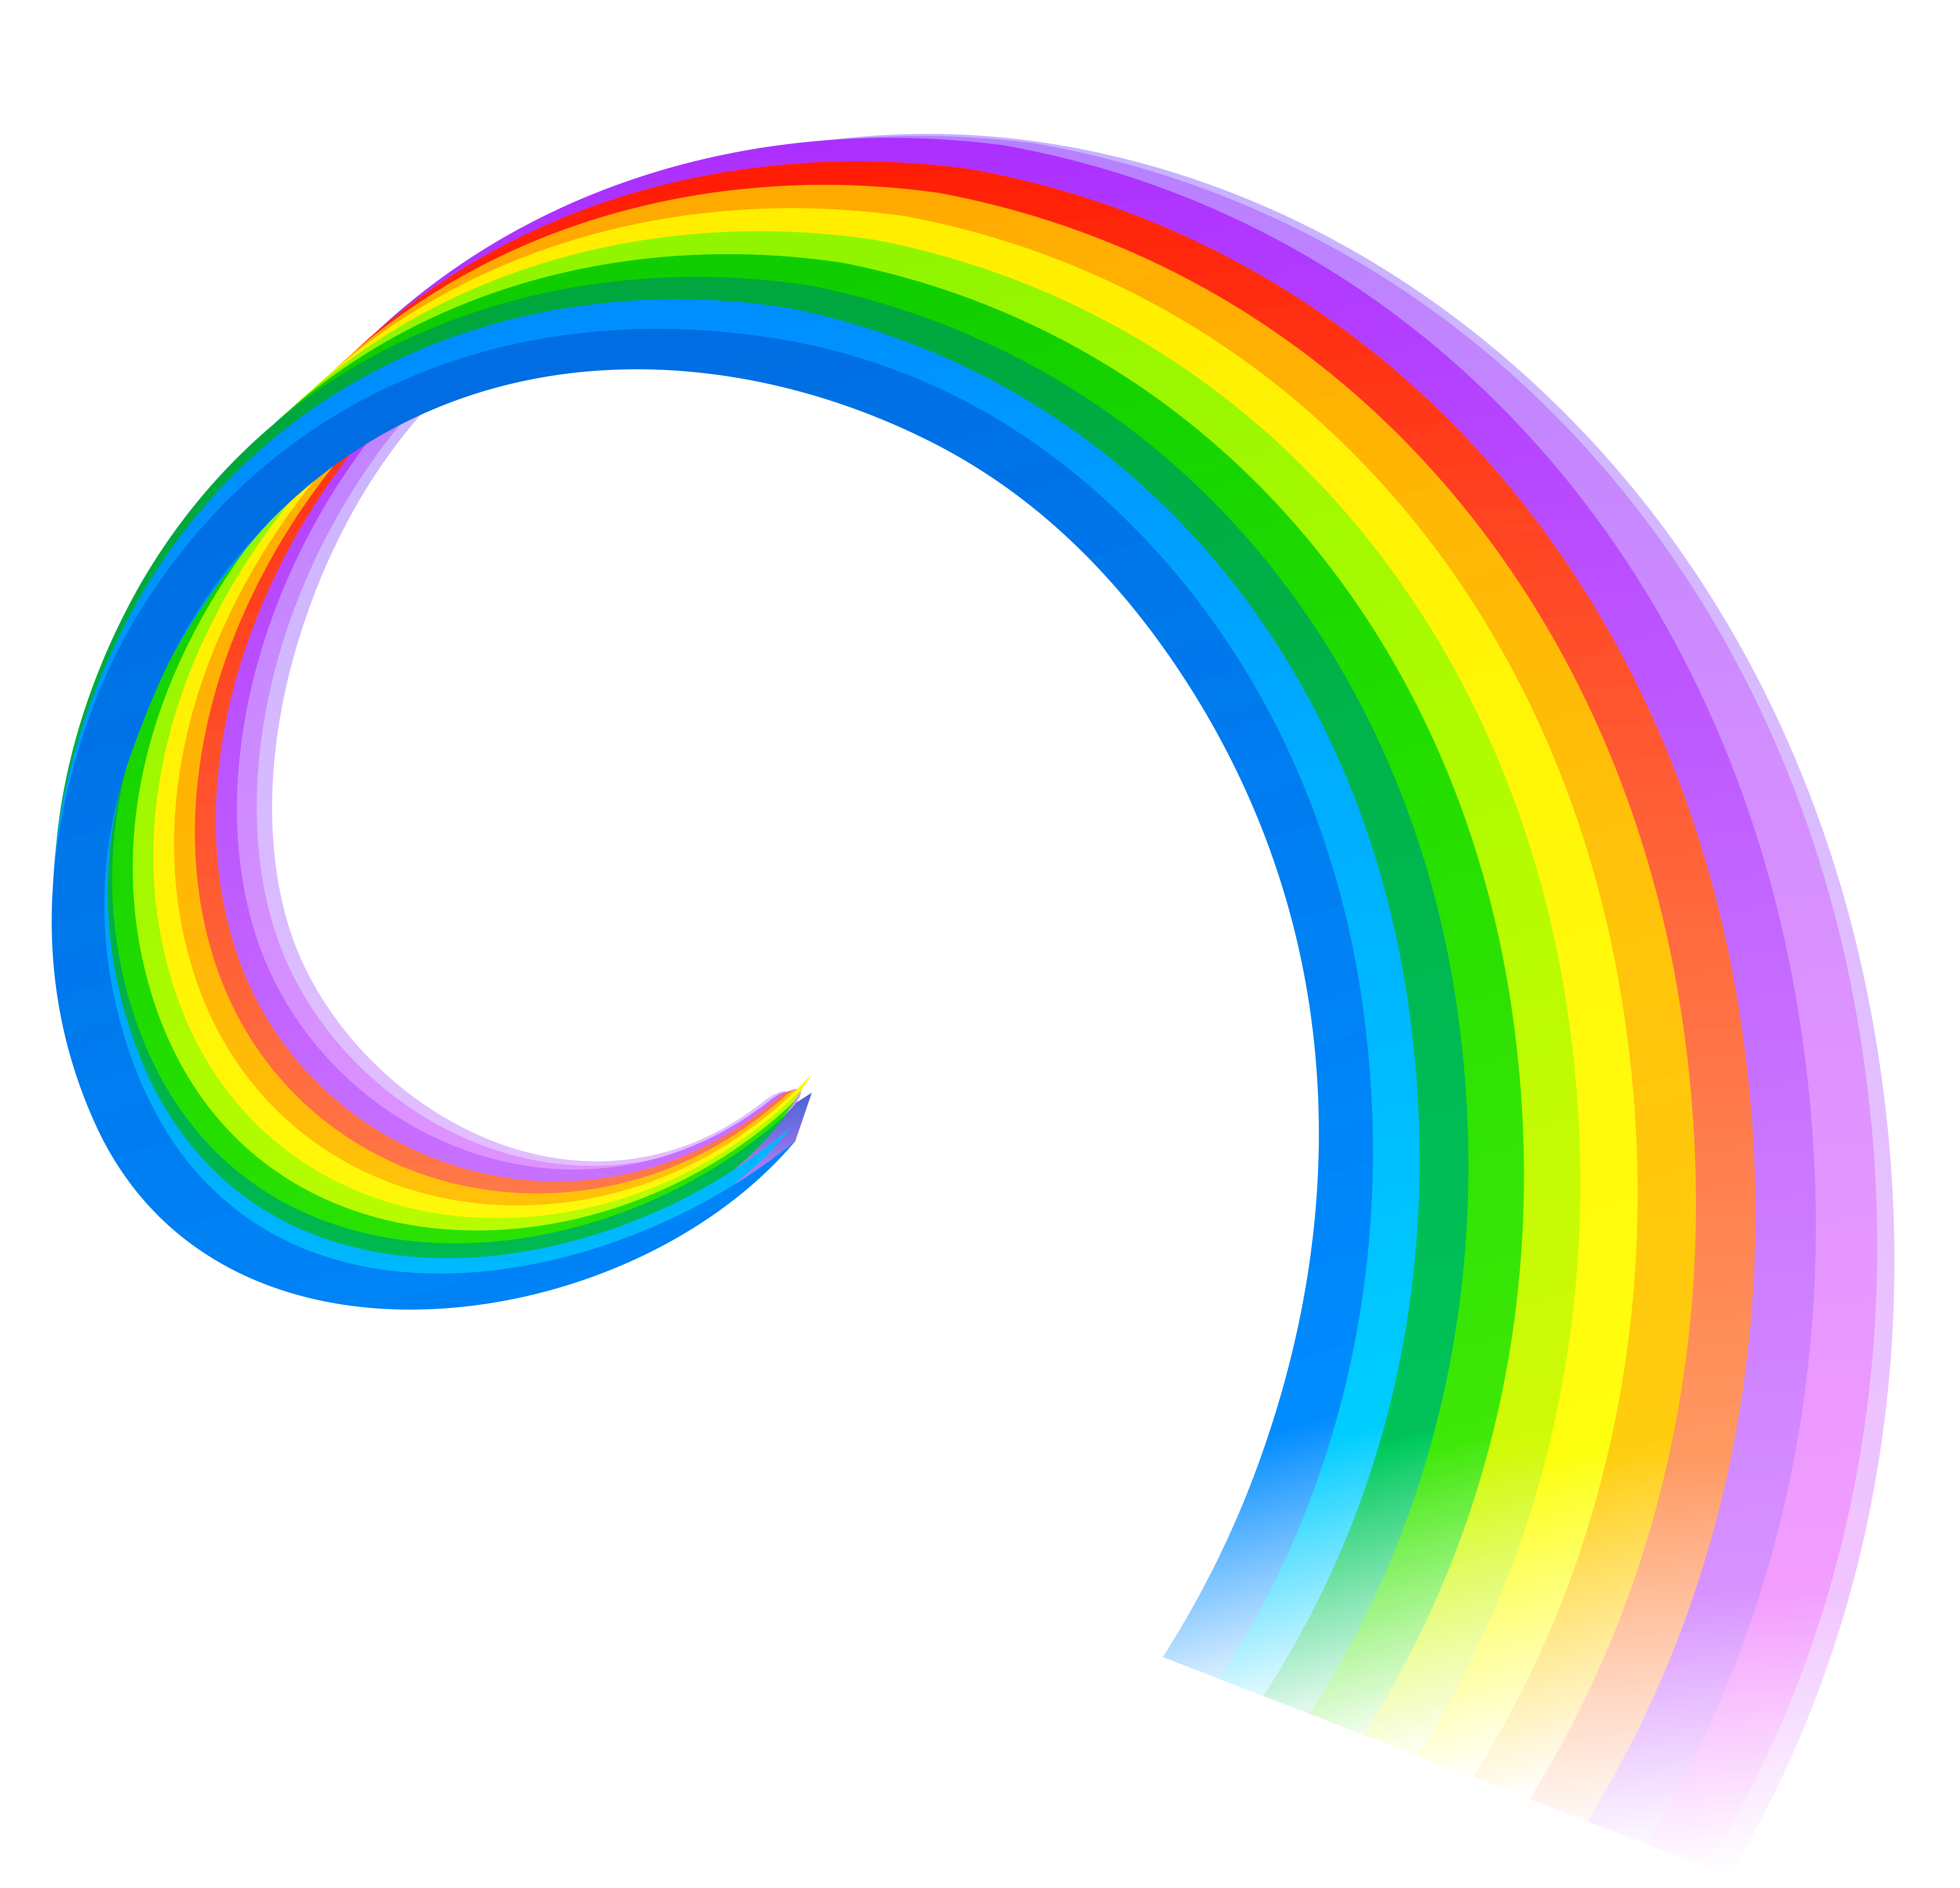 https://gallery.yopriceville.com/var/albums/Free-Clipart-Pictures/Rainbows-PNG/Rainbow_Line_PNG_Clipart.png?m=1629810181